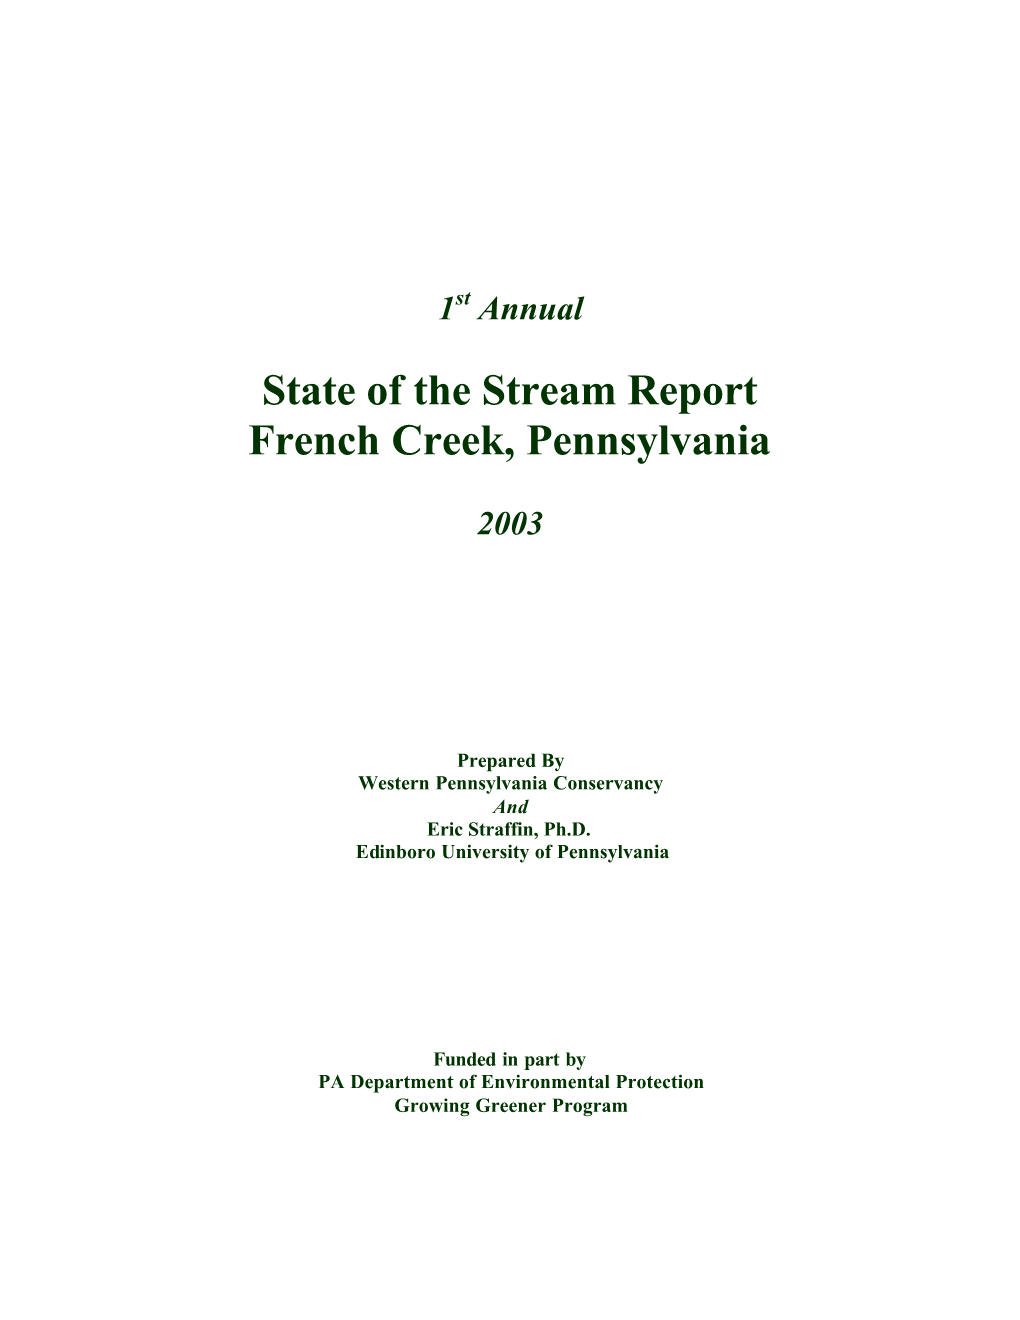 State of the Stream Report French Creek, Pennsylvania